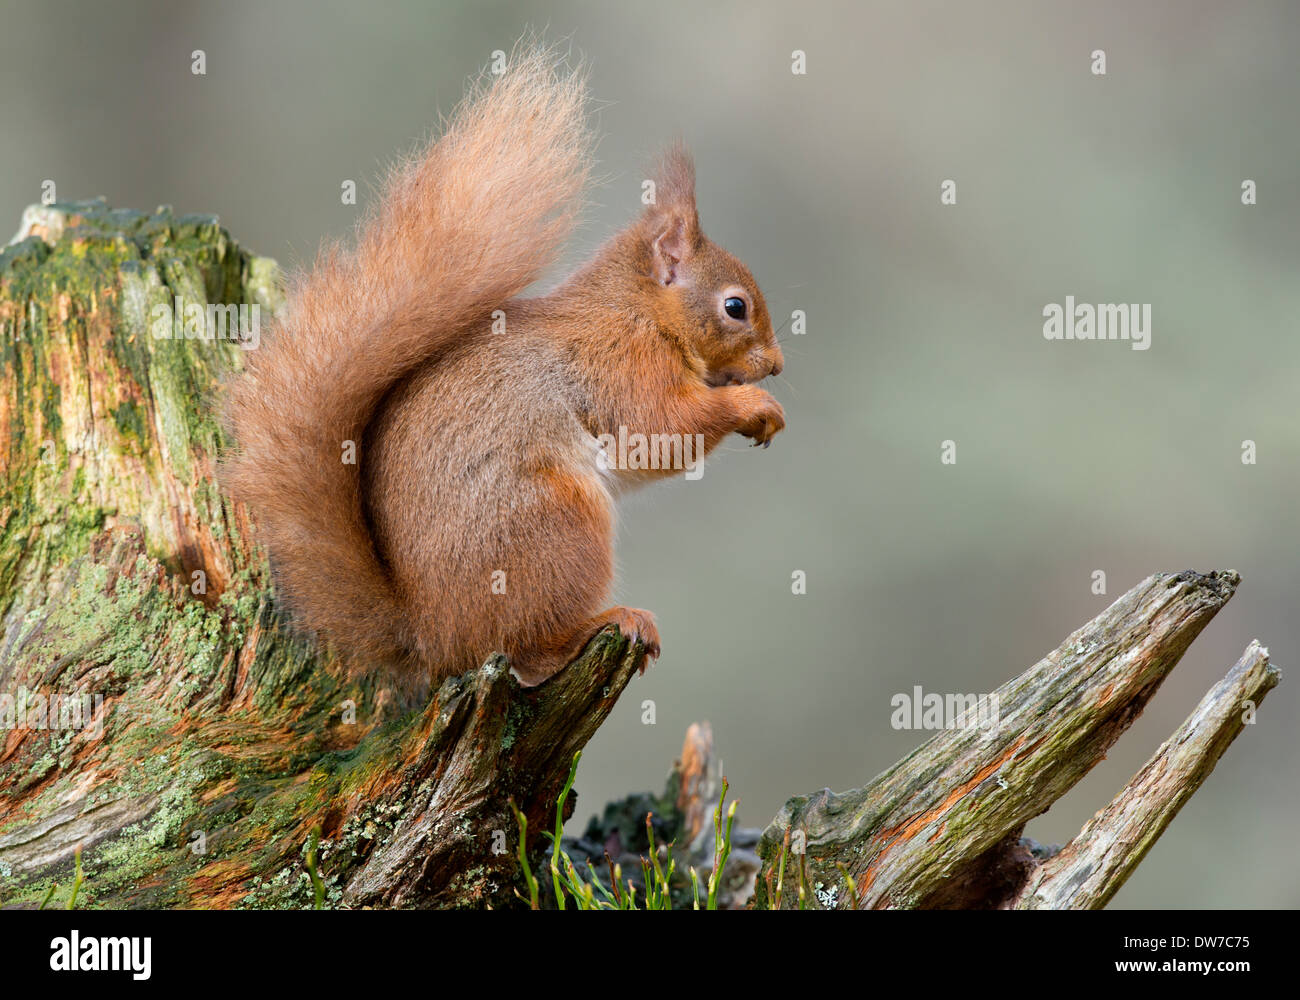 a red squirrel sat on a old tree stump Stock Photo